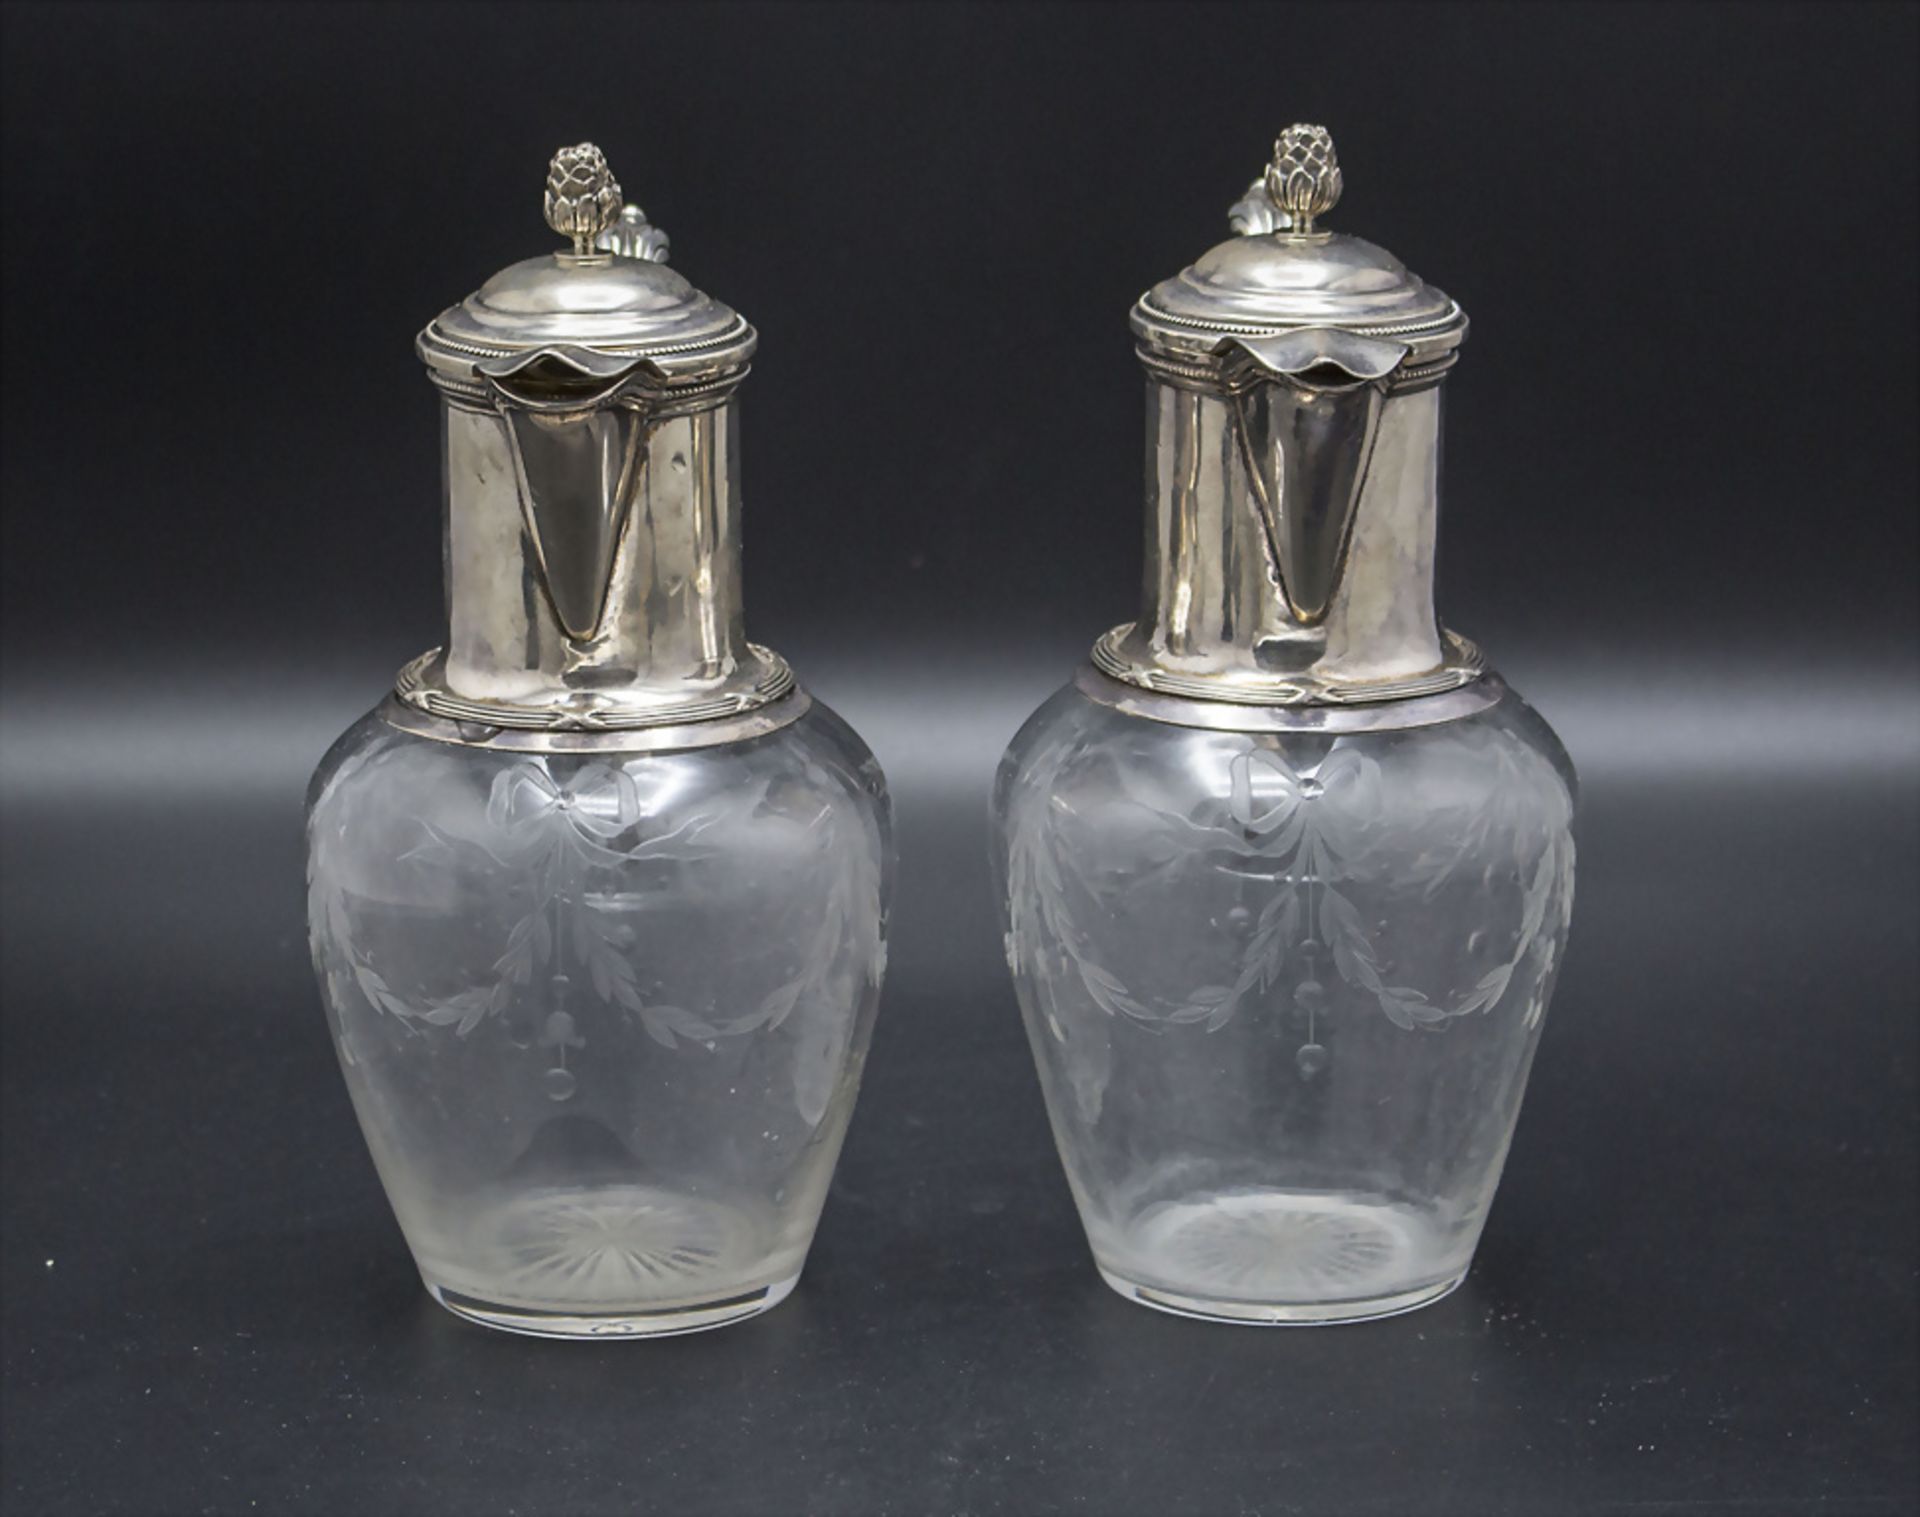 Paar Karaffen / A pair of decanters with silver mounts, Paris, um 1900 - Image 2 of 6